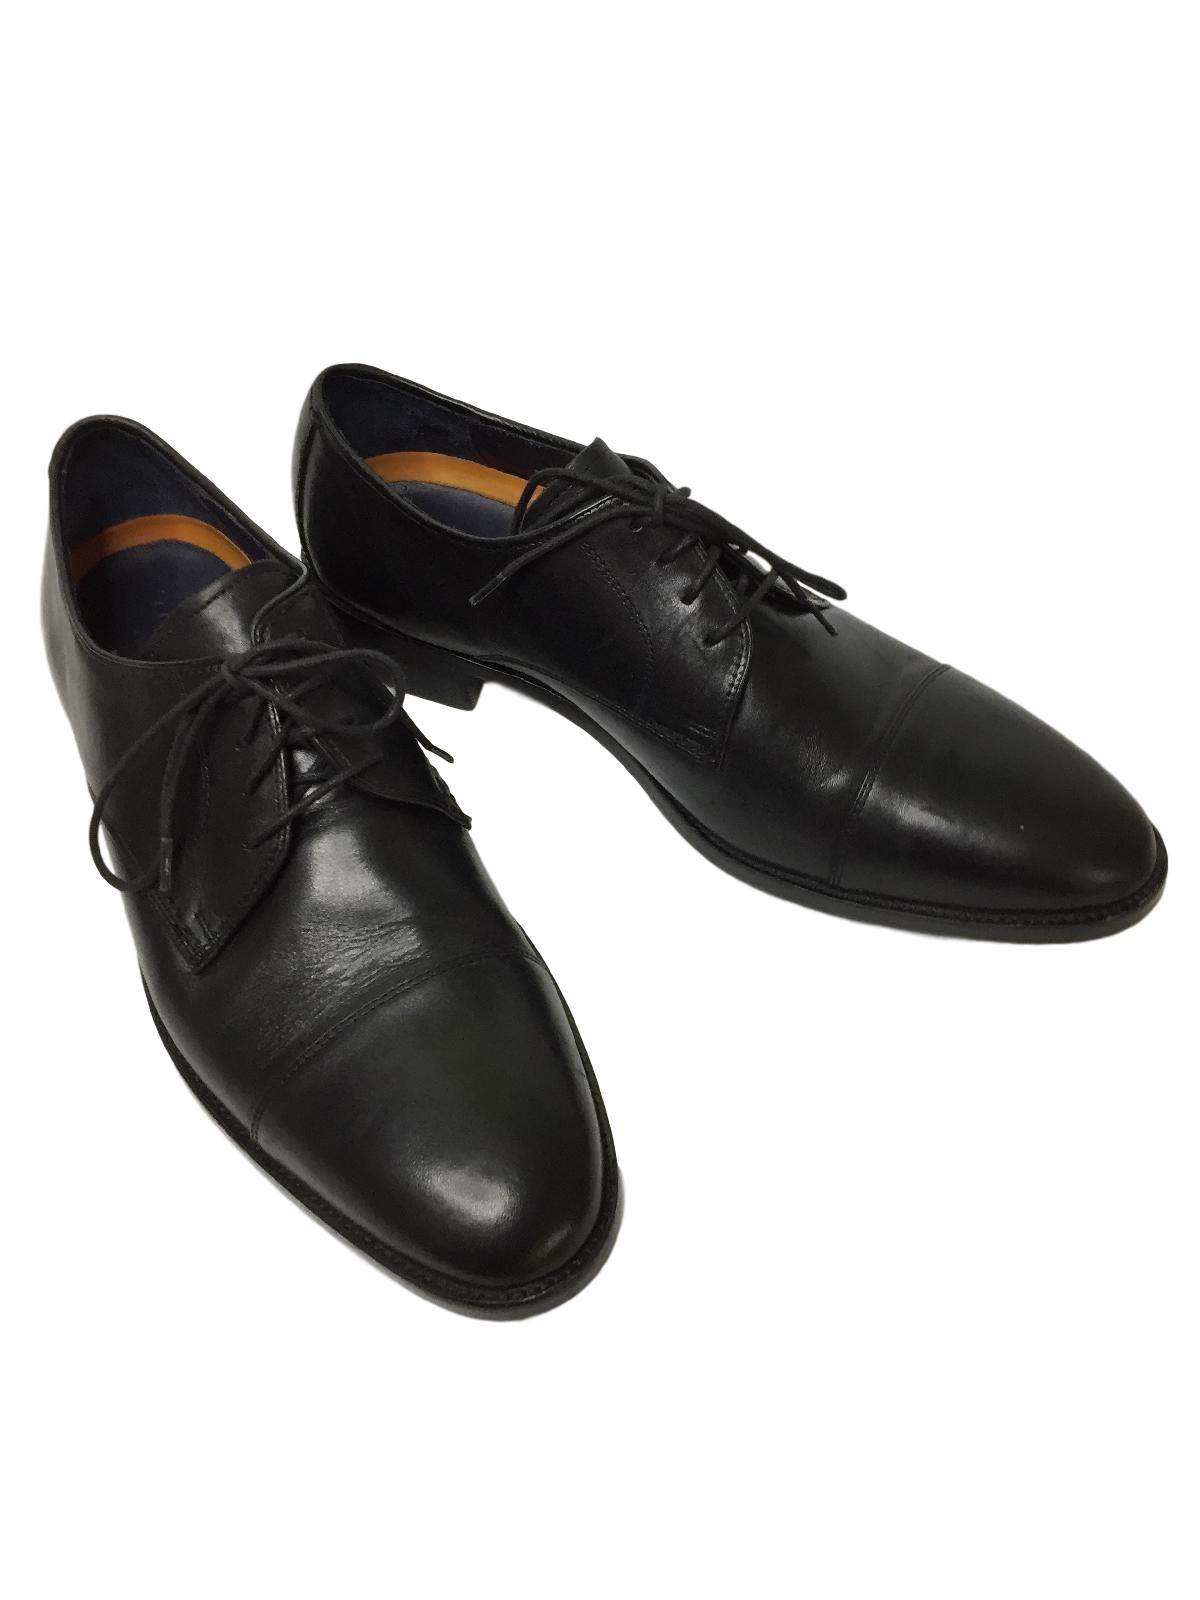 Cole Haan Nineties Vintage Shoes: 90s -Cole Haan- Mens black smooth leather  classic cap toe style town shoes dress oxfords with cap toe detail, four  eyelet lacing, leather lining, vinyl soles, and